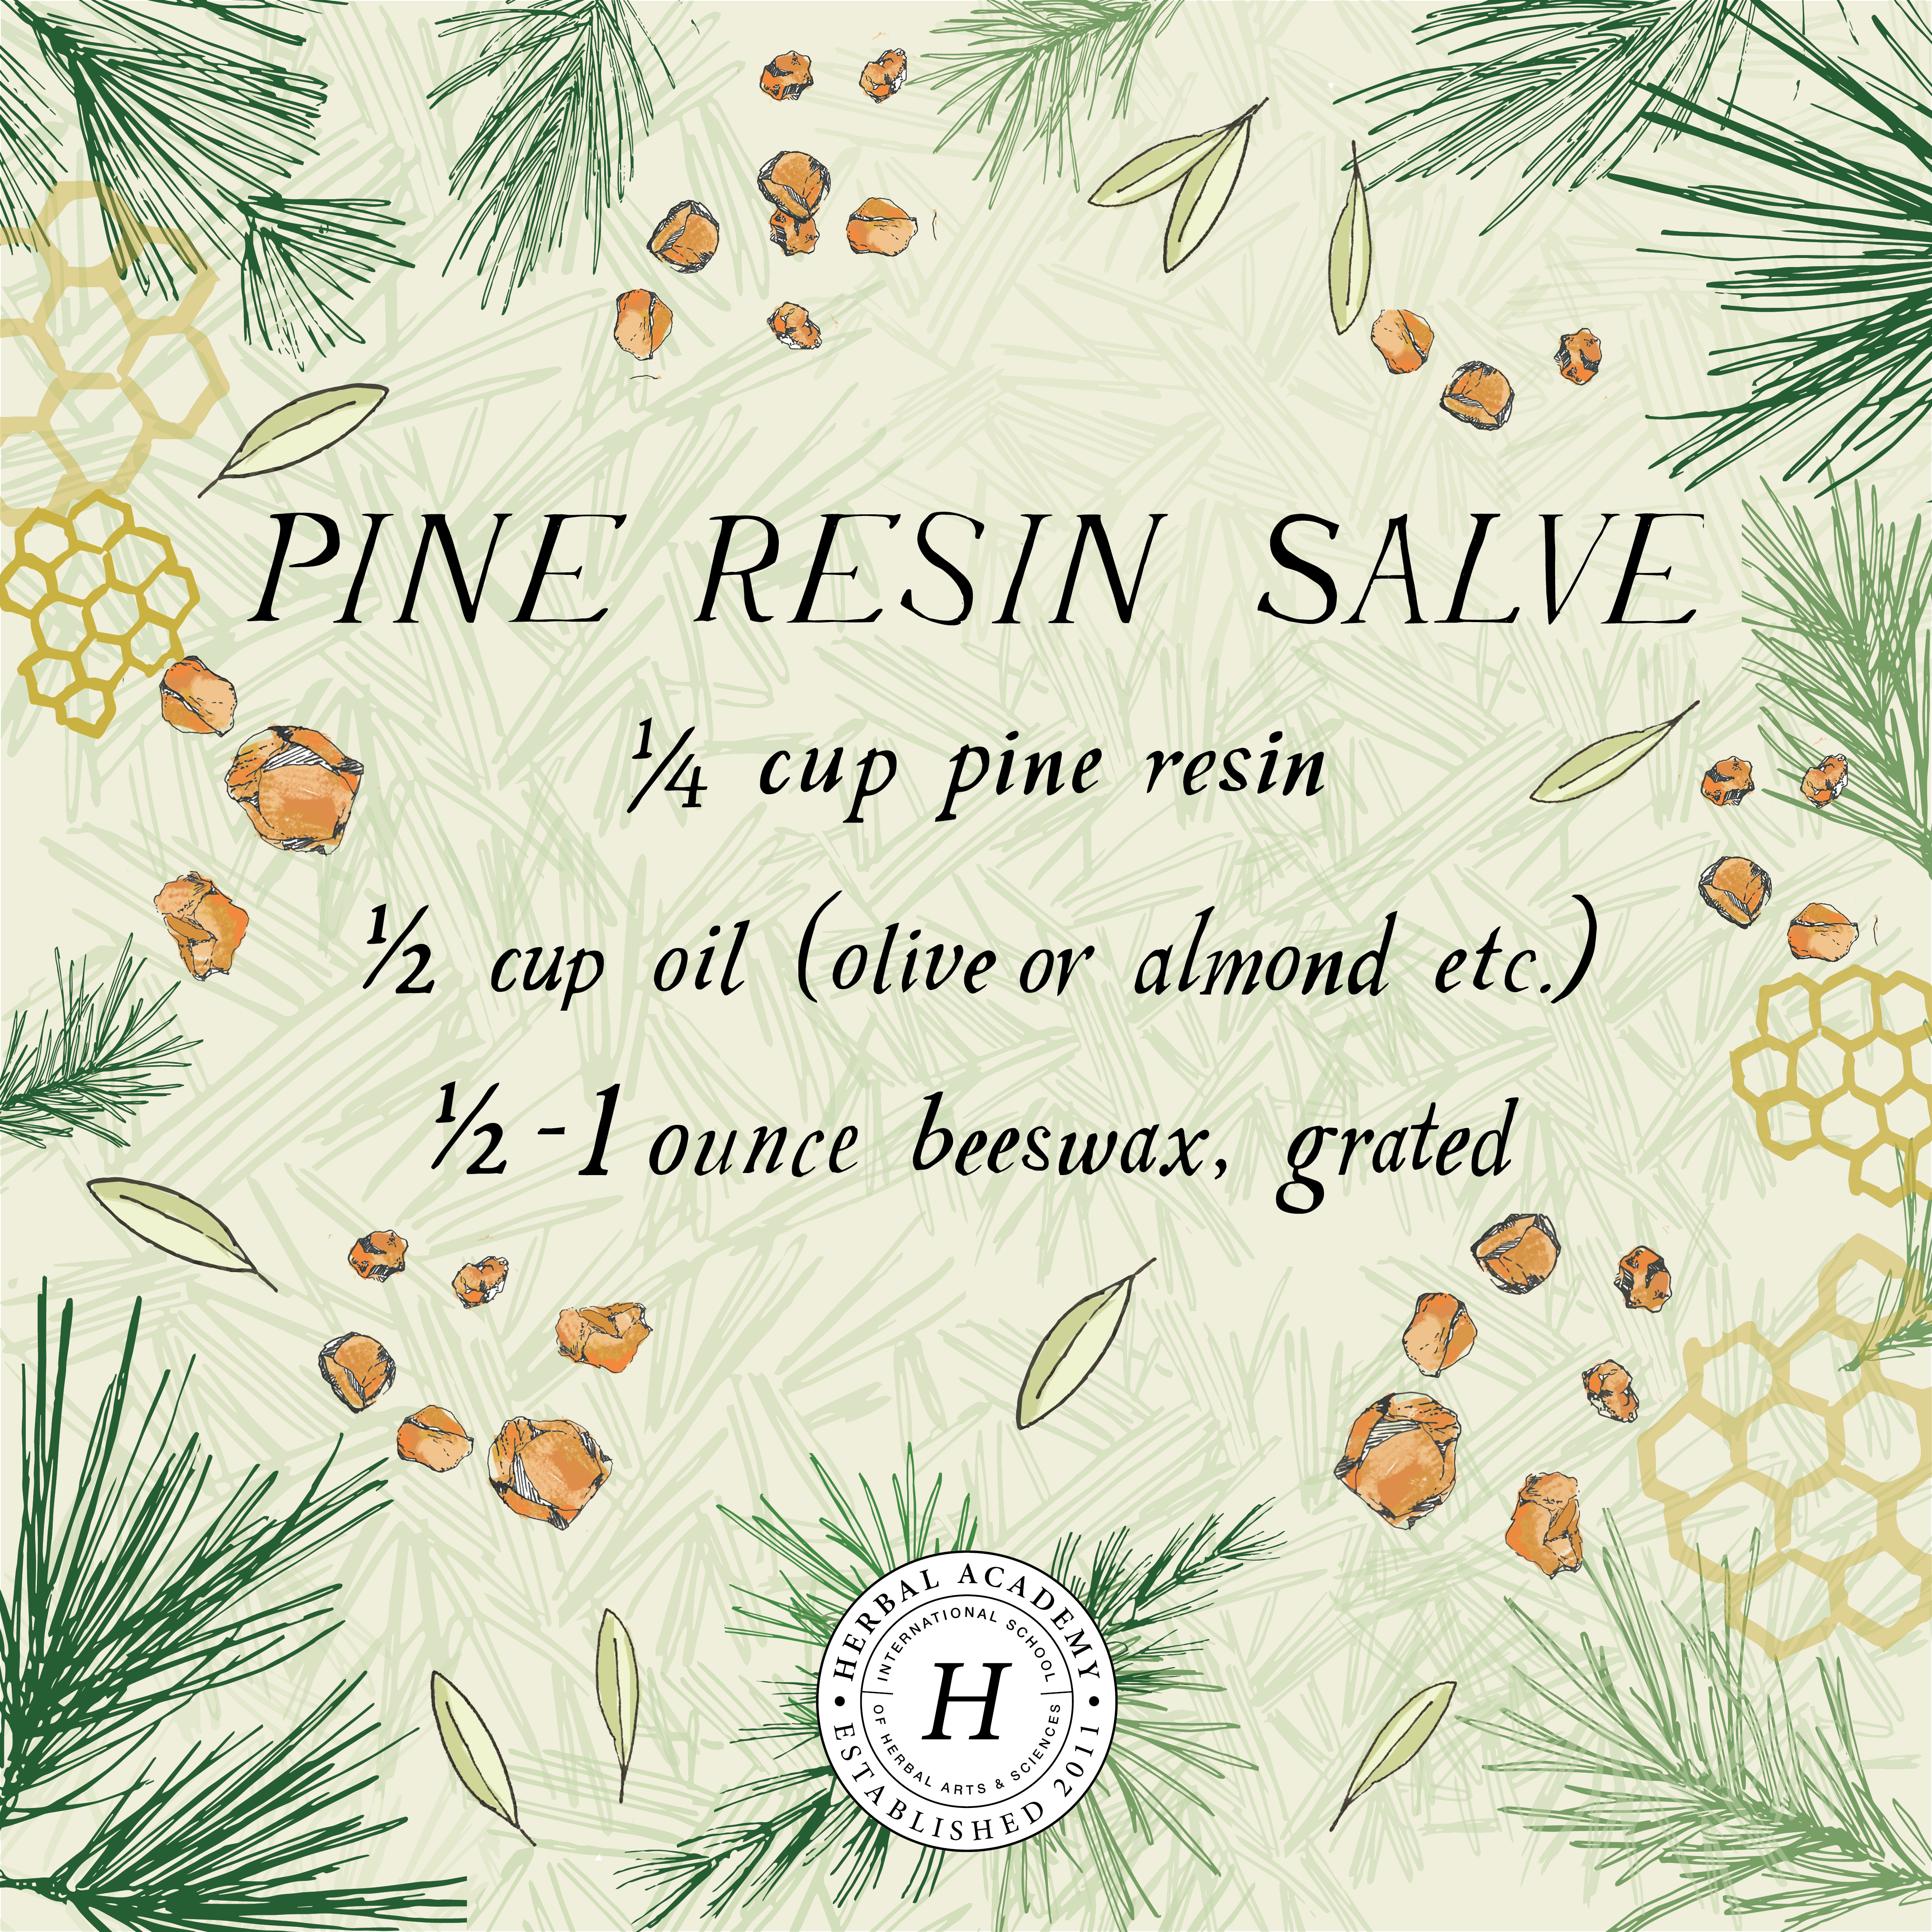 How To Make Pine Resin Salve | Herbal Academy | Did you know pine resin has been used historically for topical wound care? Learn how to make pine resin salve for your first aid kit!